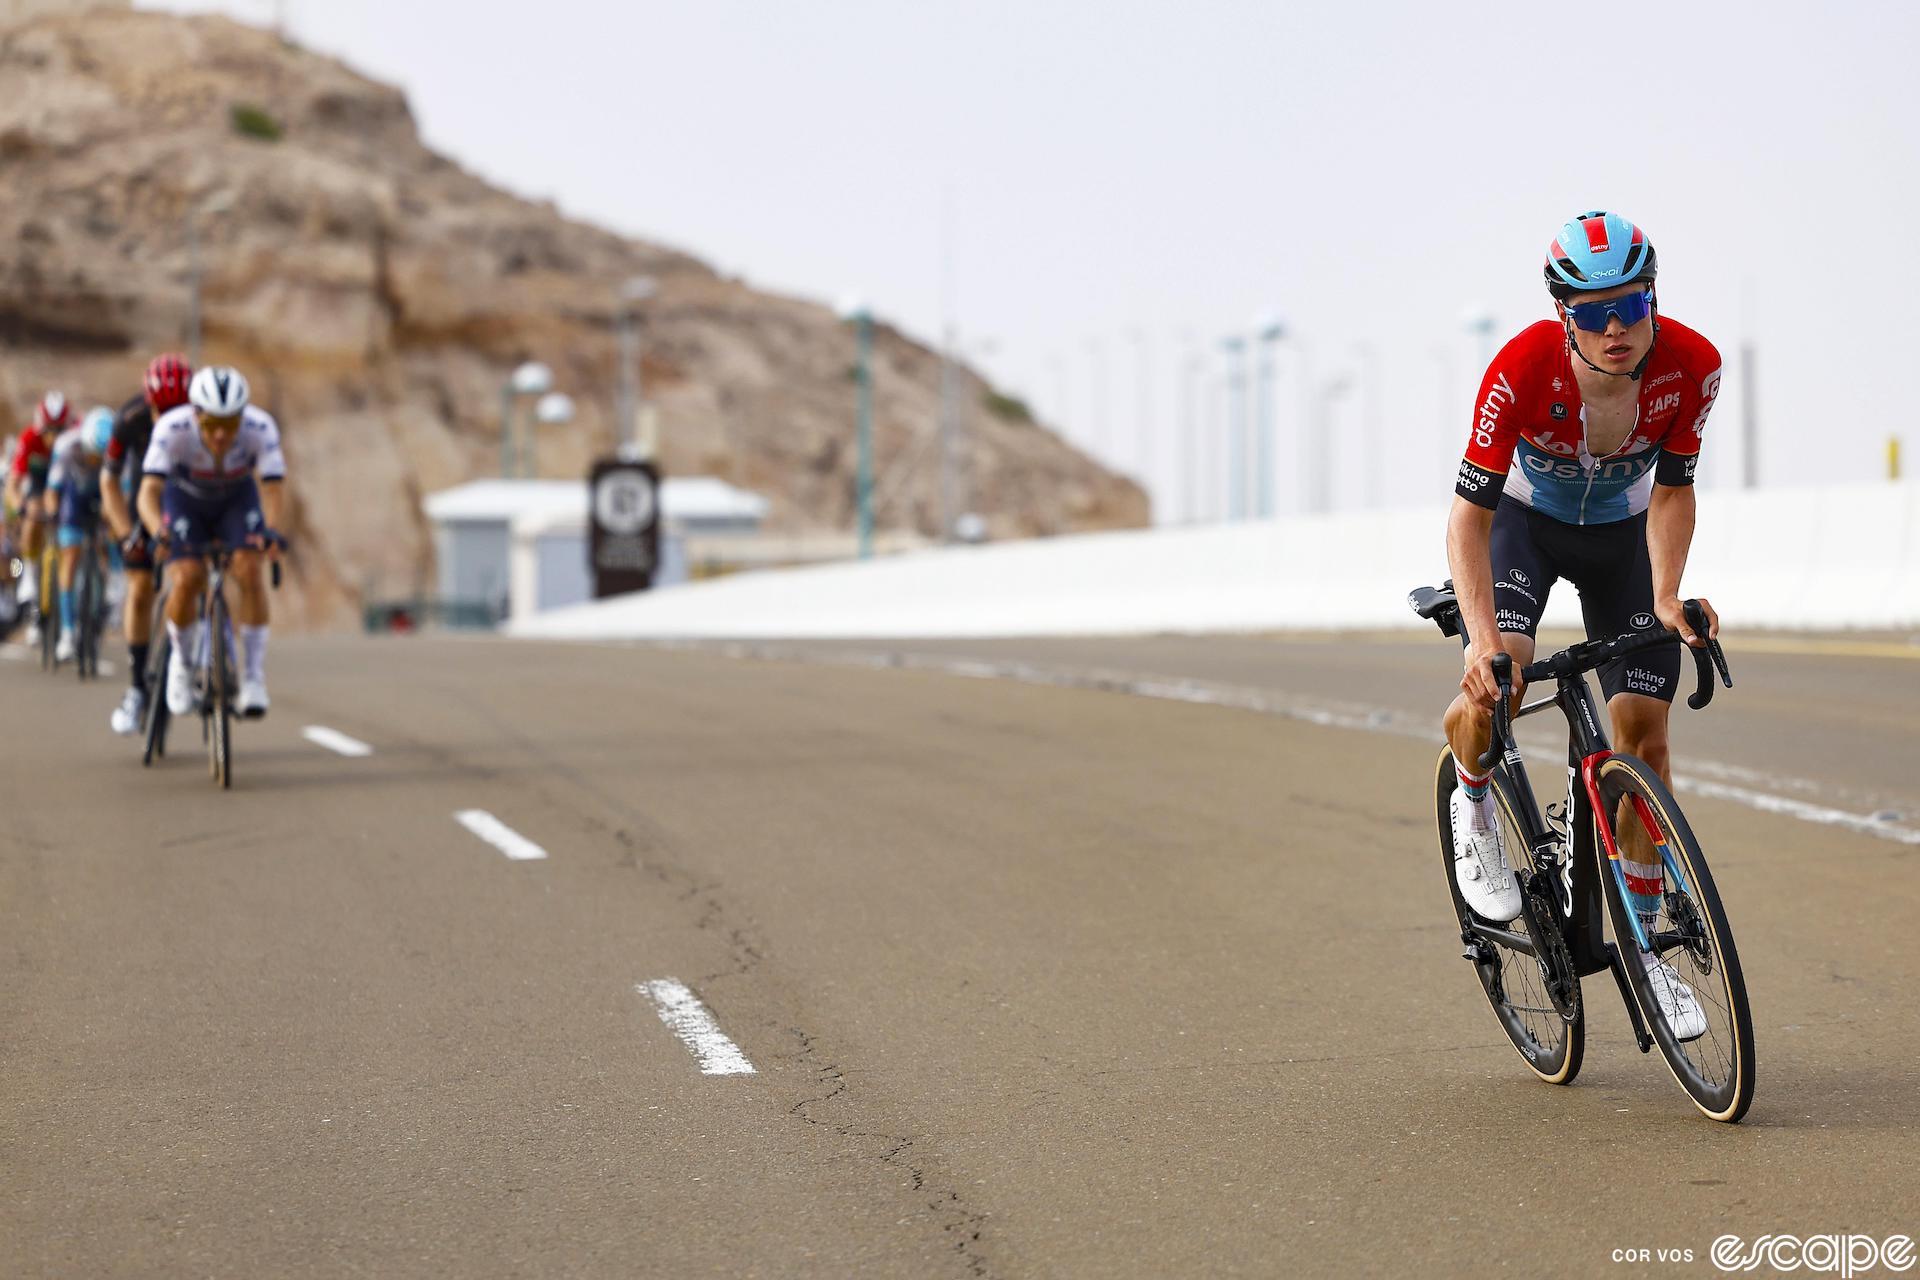 Lennart Van Eetvelt climbs Jabel Hafeet at the 2024 UAE Tour. He's out of the saddle and off the front; roughly 10 meters behind, a Jayco-AlUla rider leads a line of riders trying to close the gap.